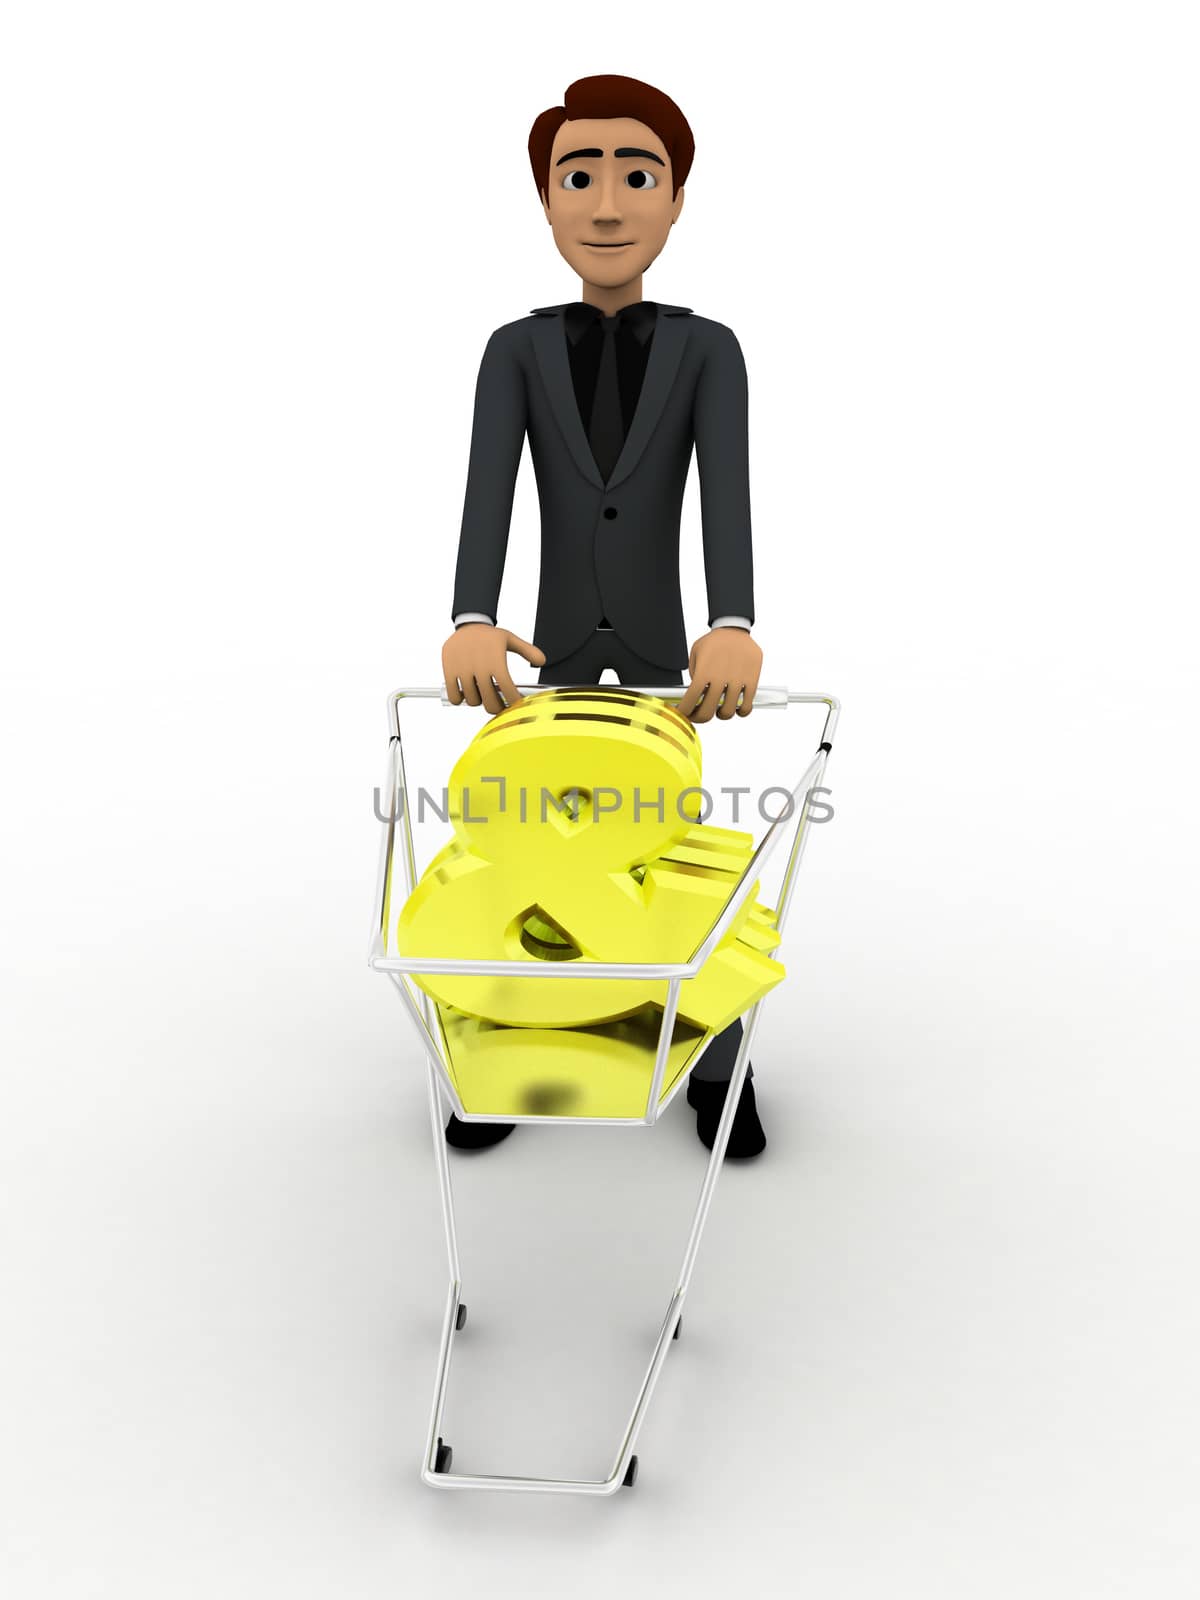 3d man pulling dollar symbol in cart concept on white background, front angle view